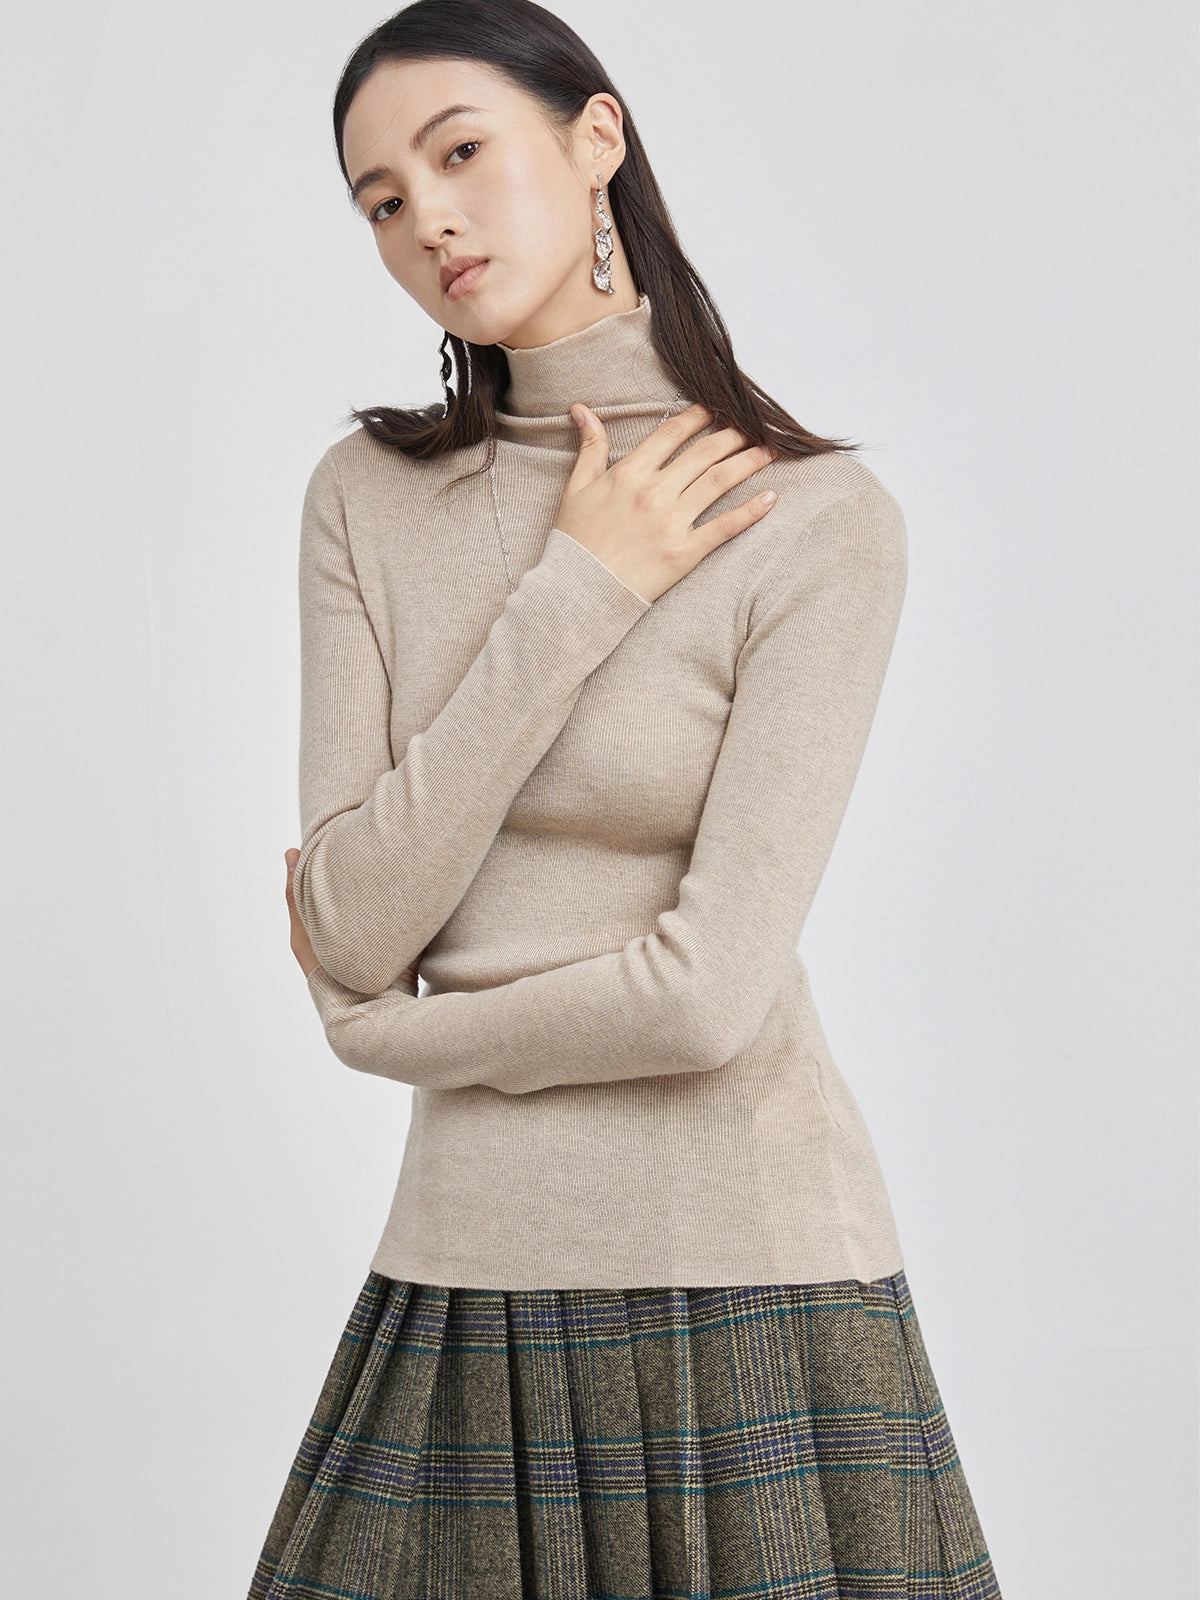 High-Neck Knit Sweater